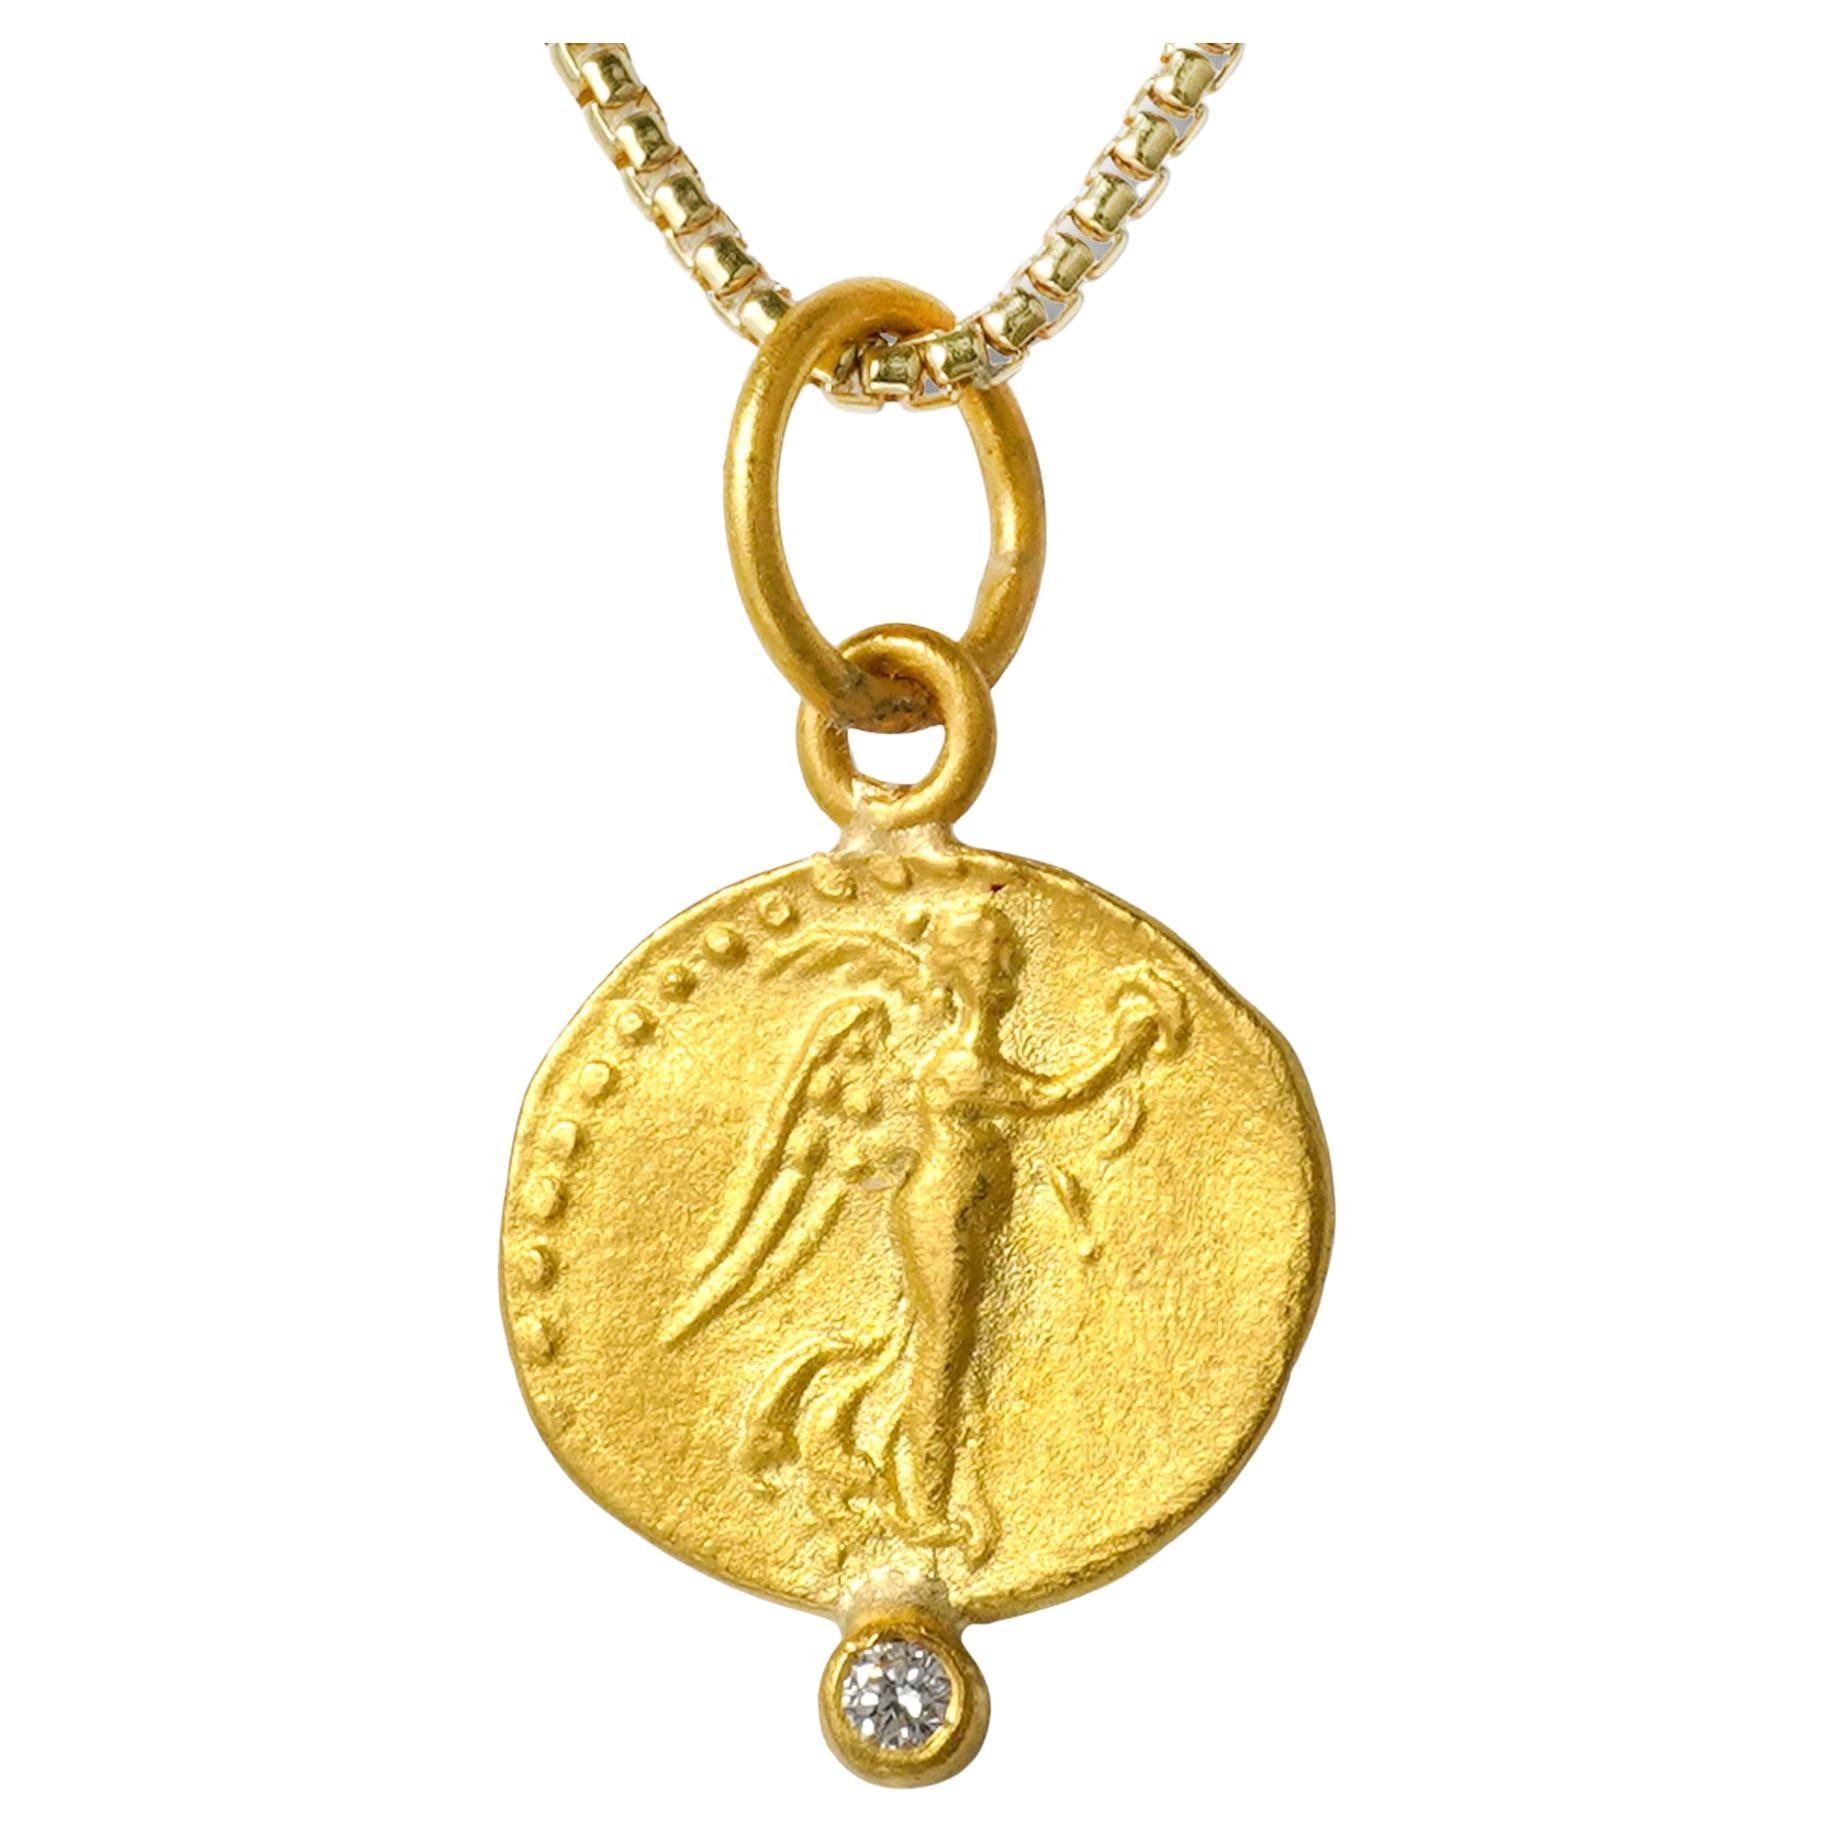 Ancient, Nike Charm Coin (Replica) Pendant with 0.02ct Diamond, 24kt Solid Gold